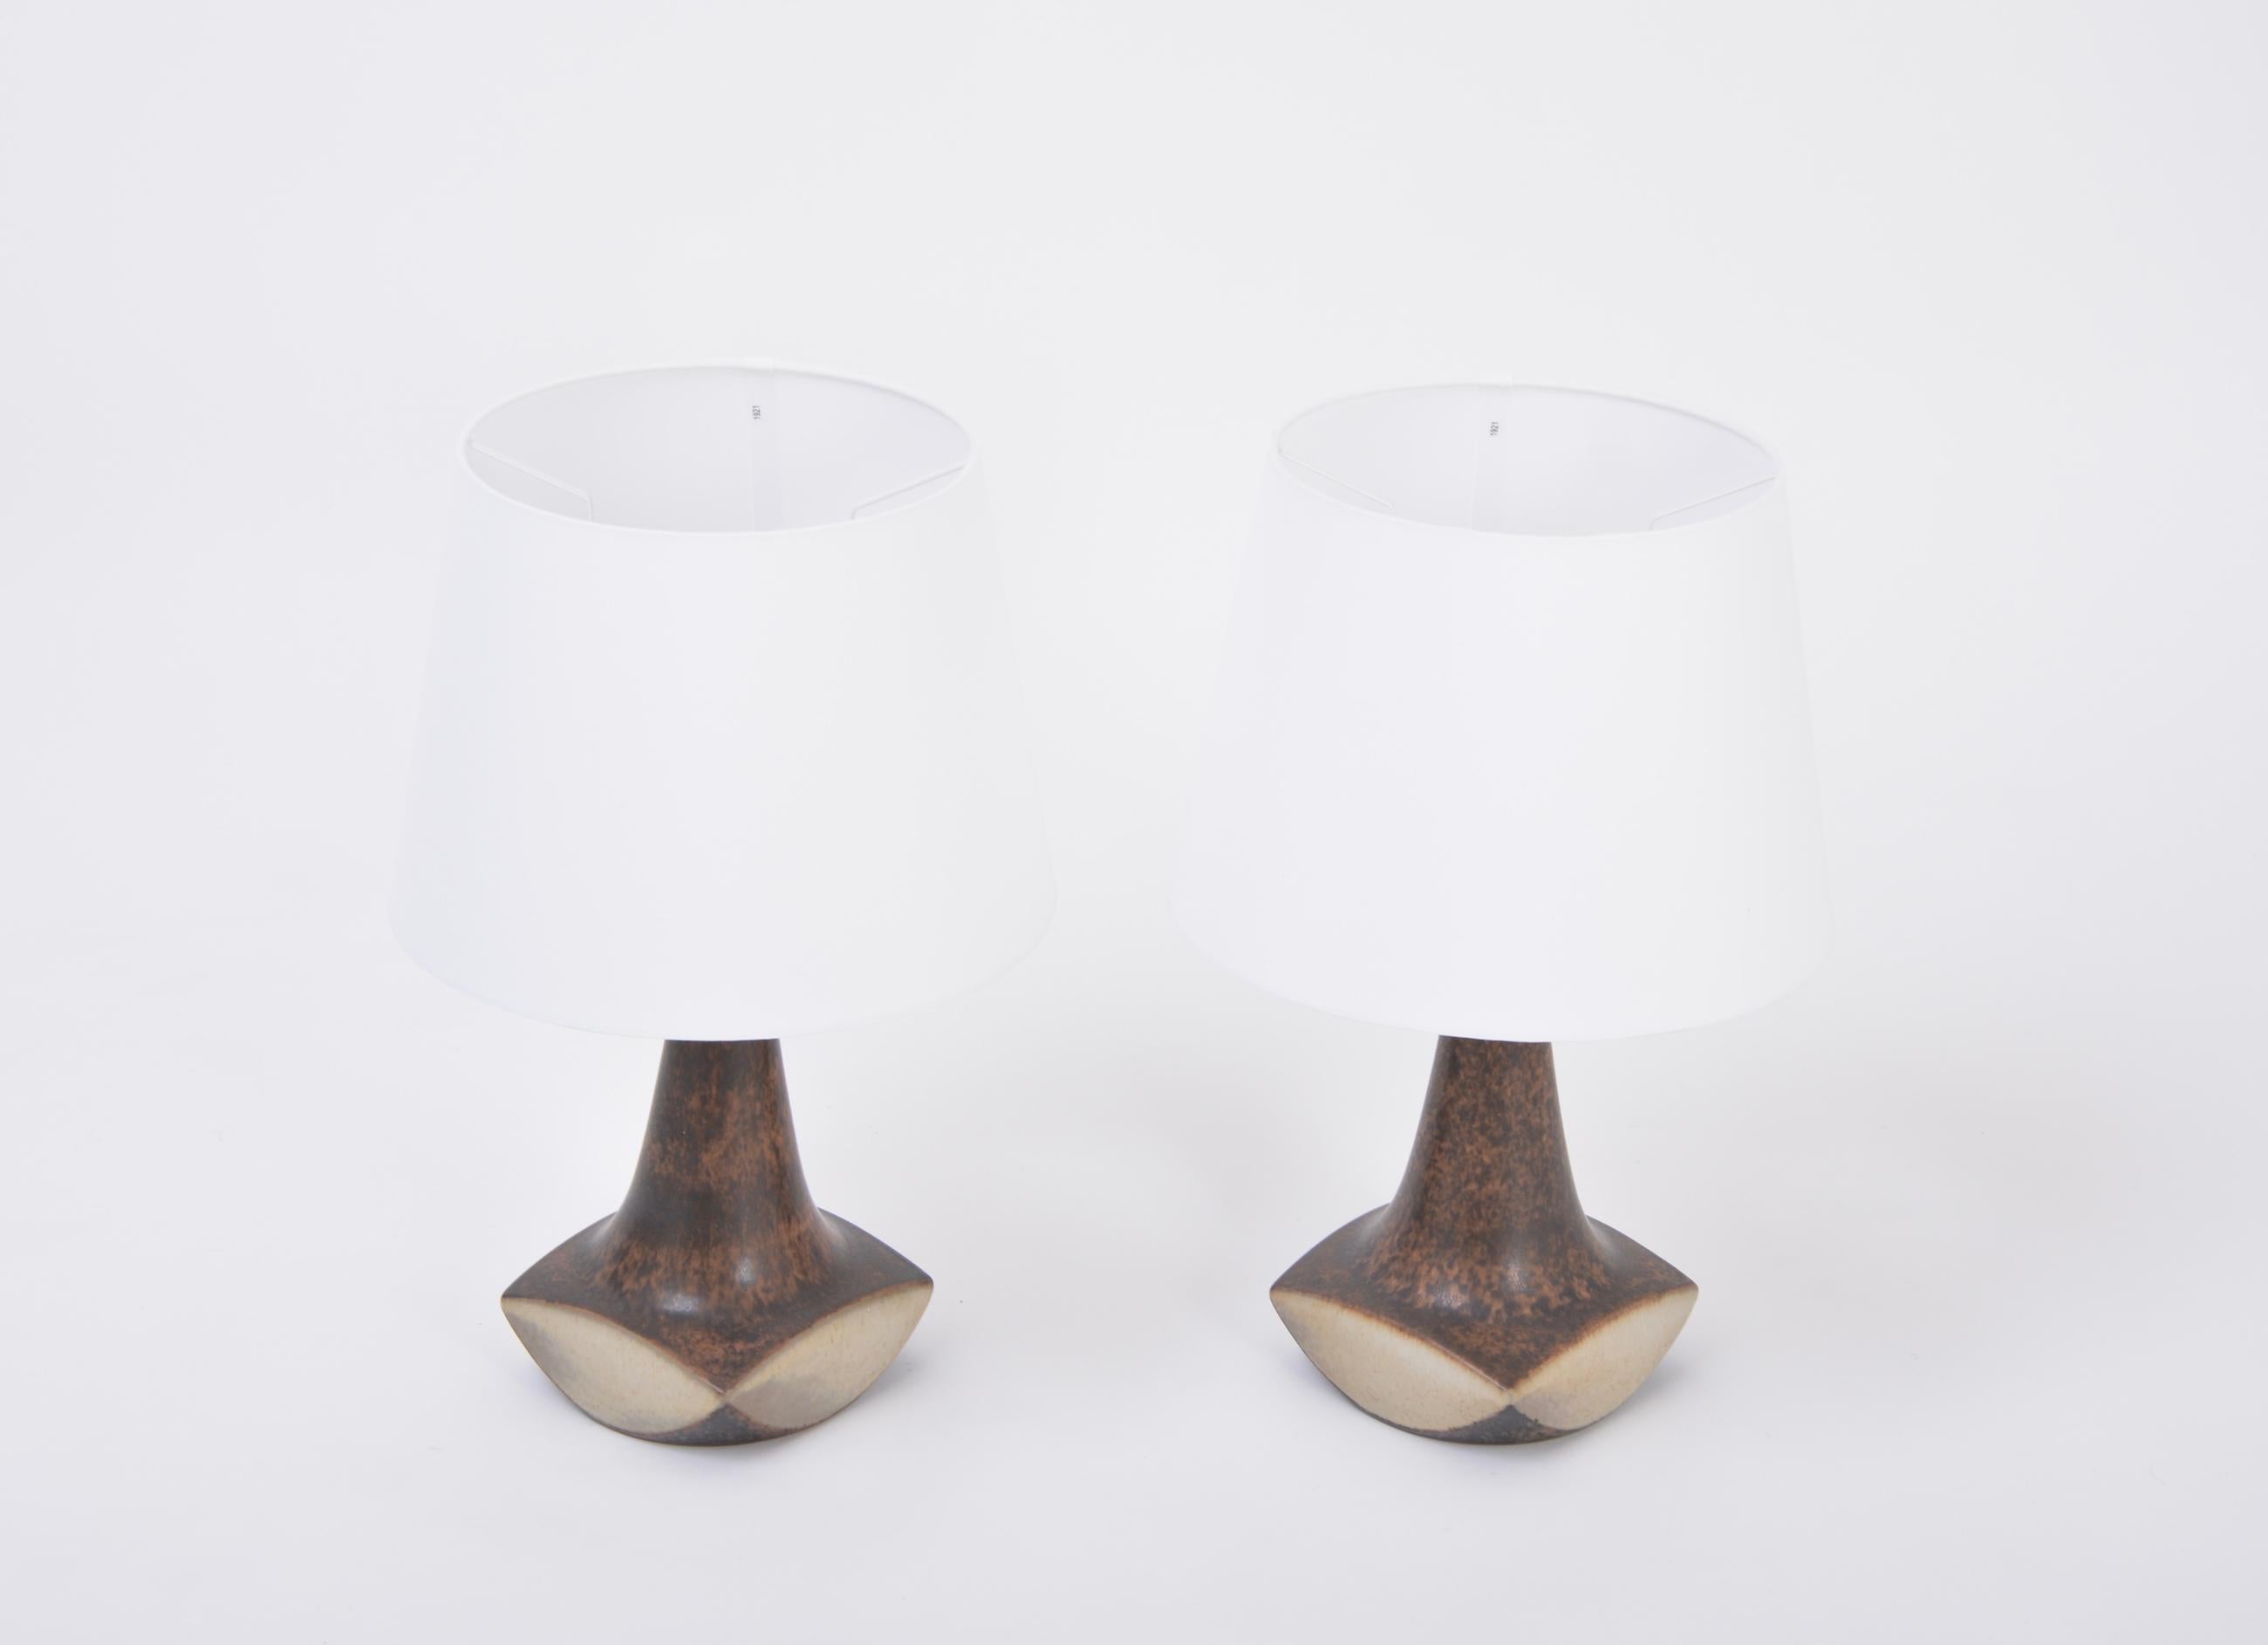 Pair of Danish midcentury table lamps by Marianne Starck for Michael Andersen 
This pair of table lamps was designed by famous Danish artist Marianne Starck in the 1960s and produced by Michael Andersen & Søn.
Beautiful sculpturally shaped base